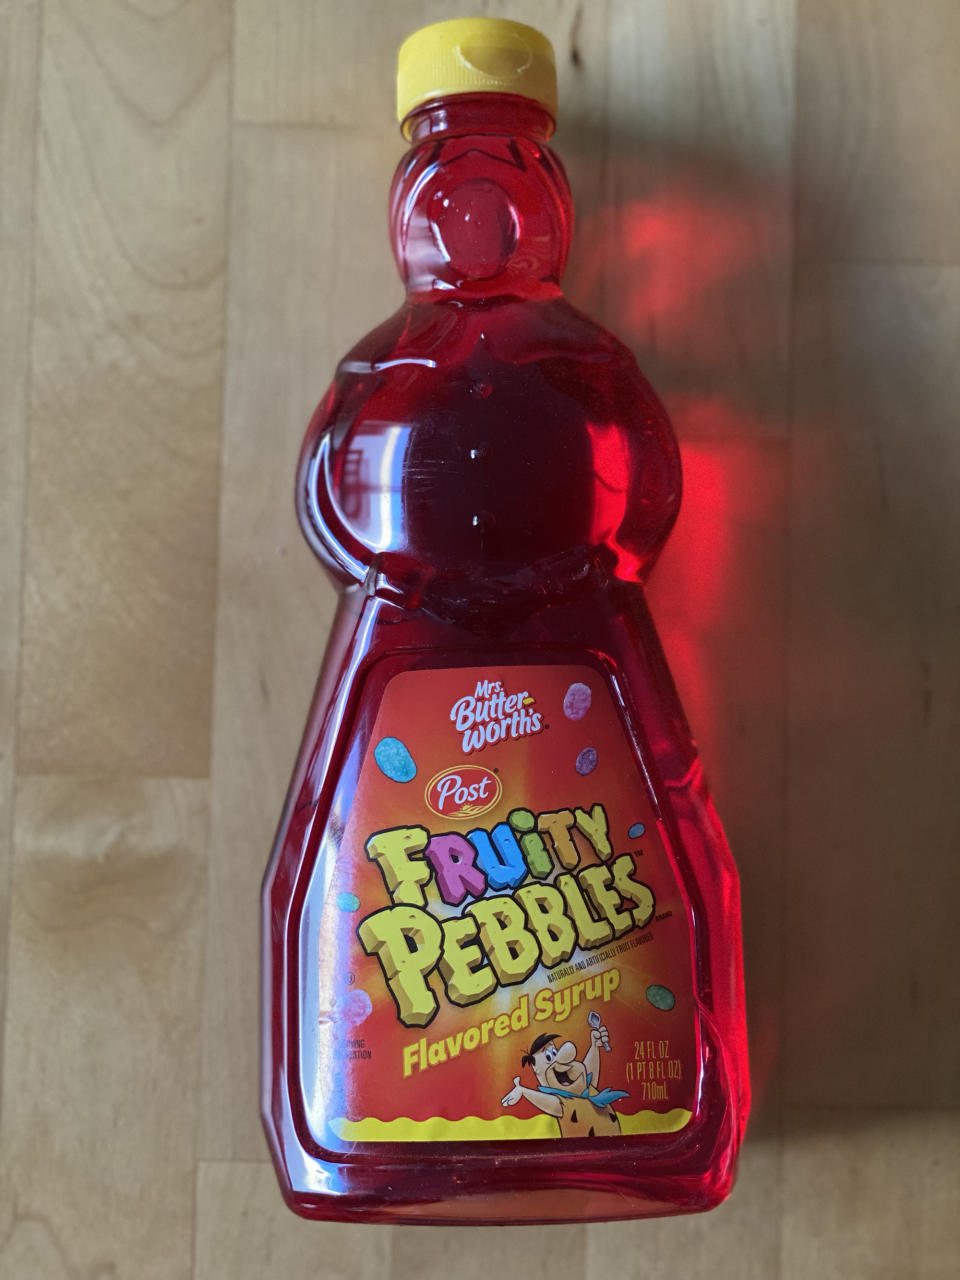 A bottle of Mrs Butterworth's Fruity Pebbles flavored syrup